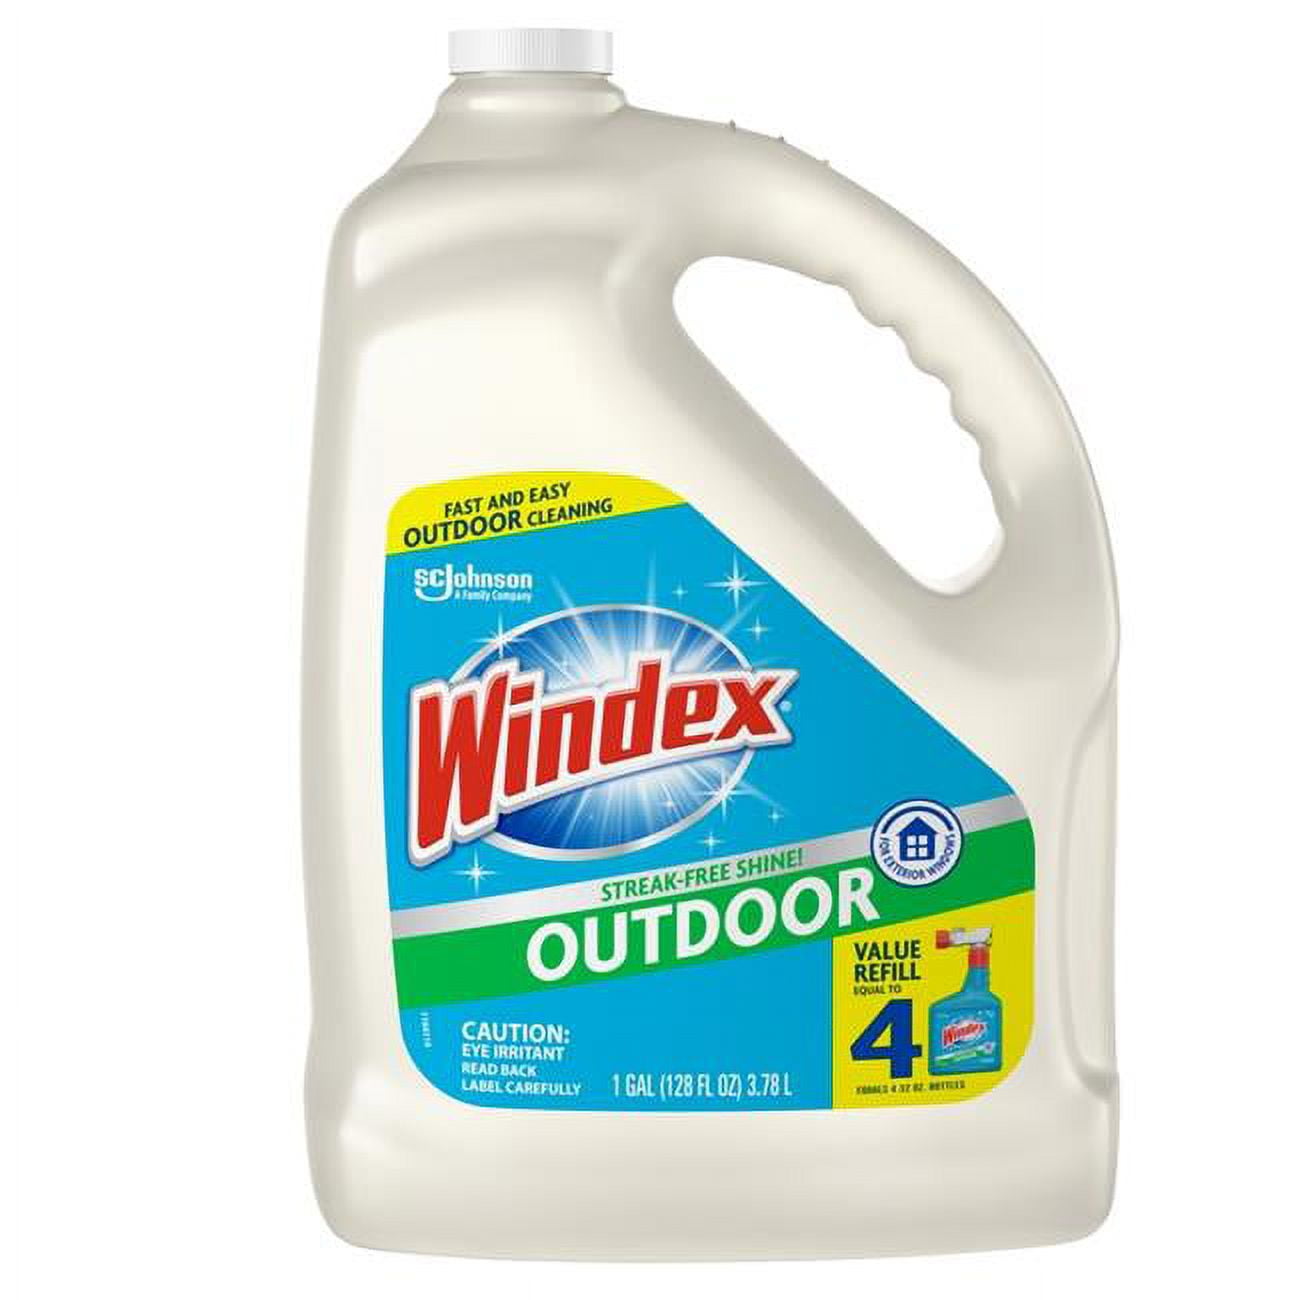 Windex Window Cleaning Pads picture